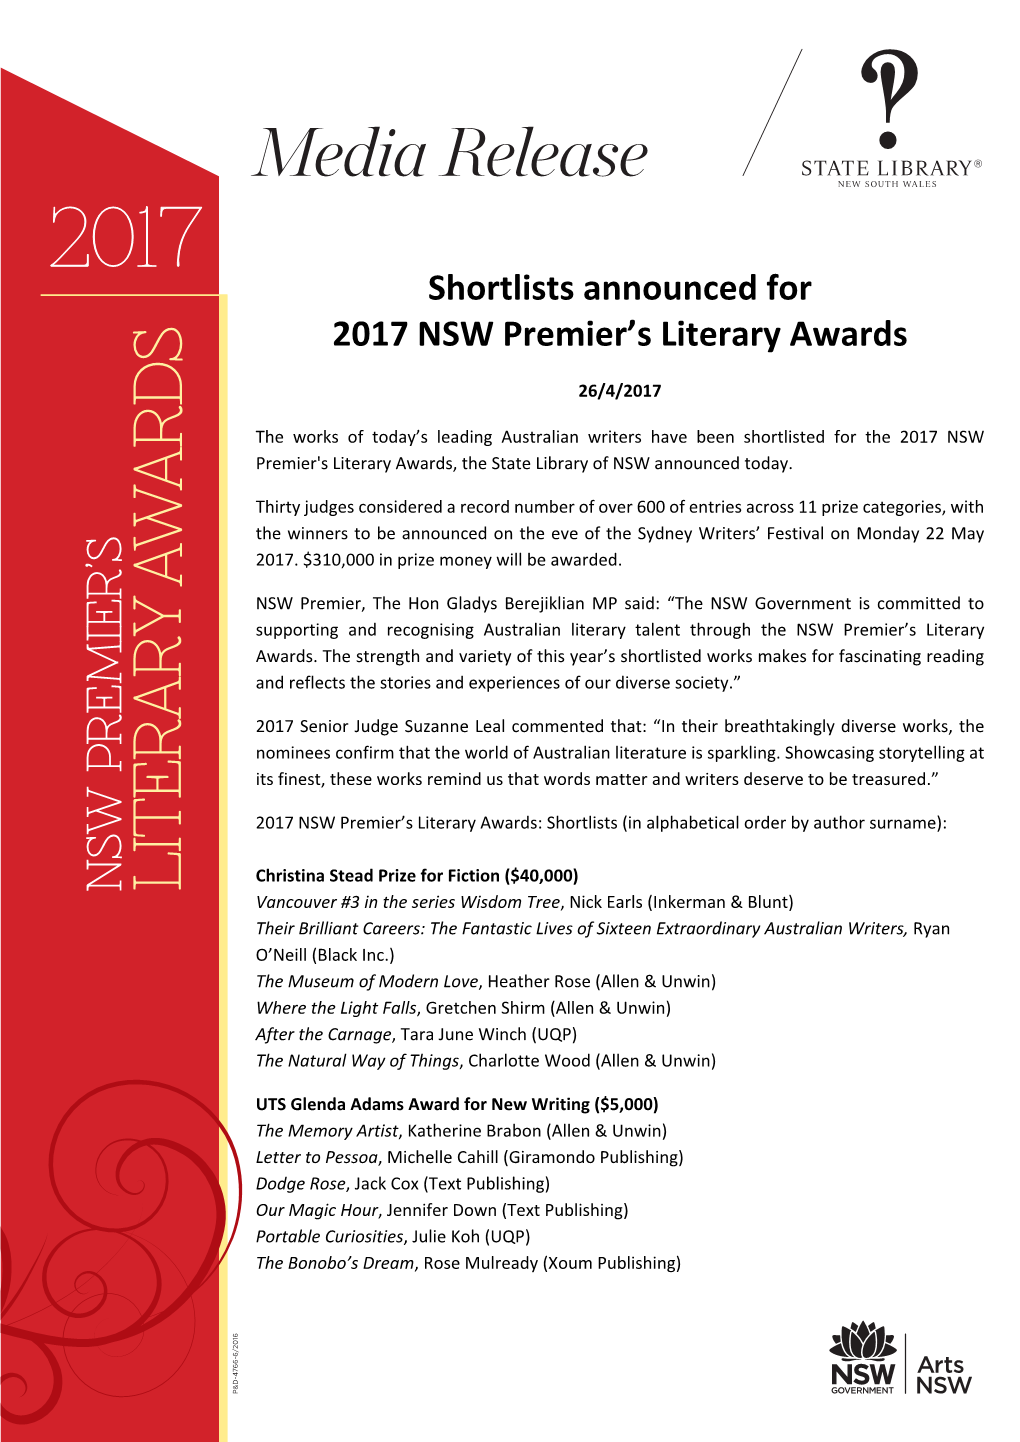 Shortlists Announced for 2017 NSW Premier's